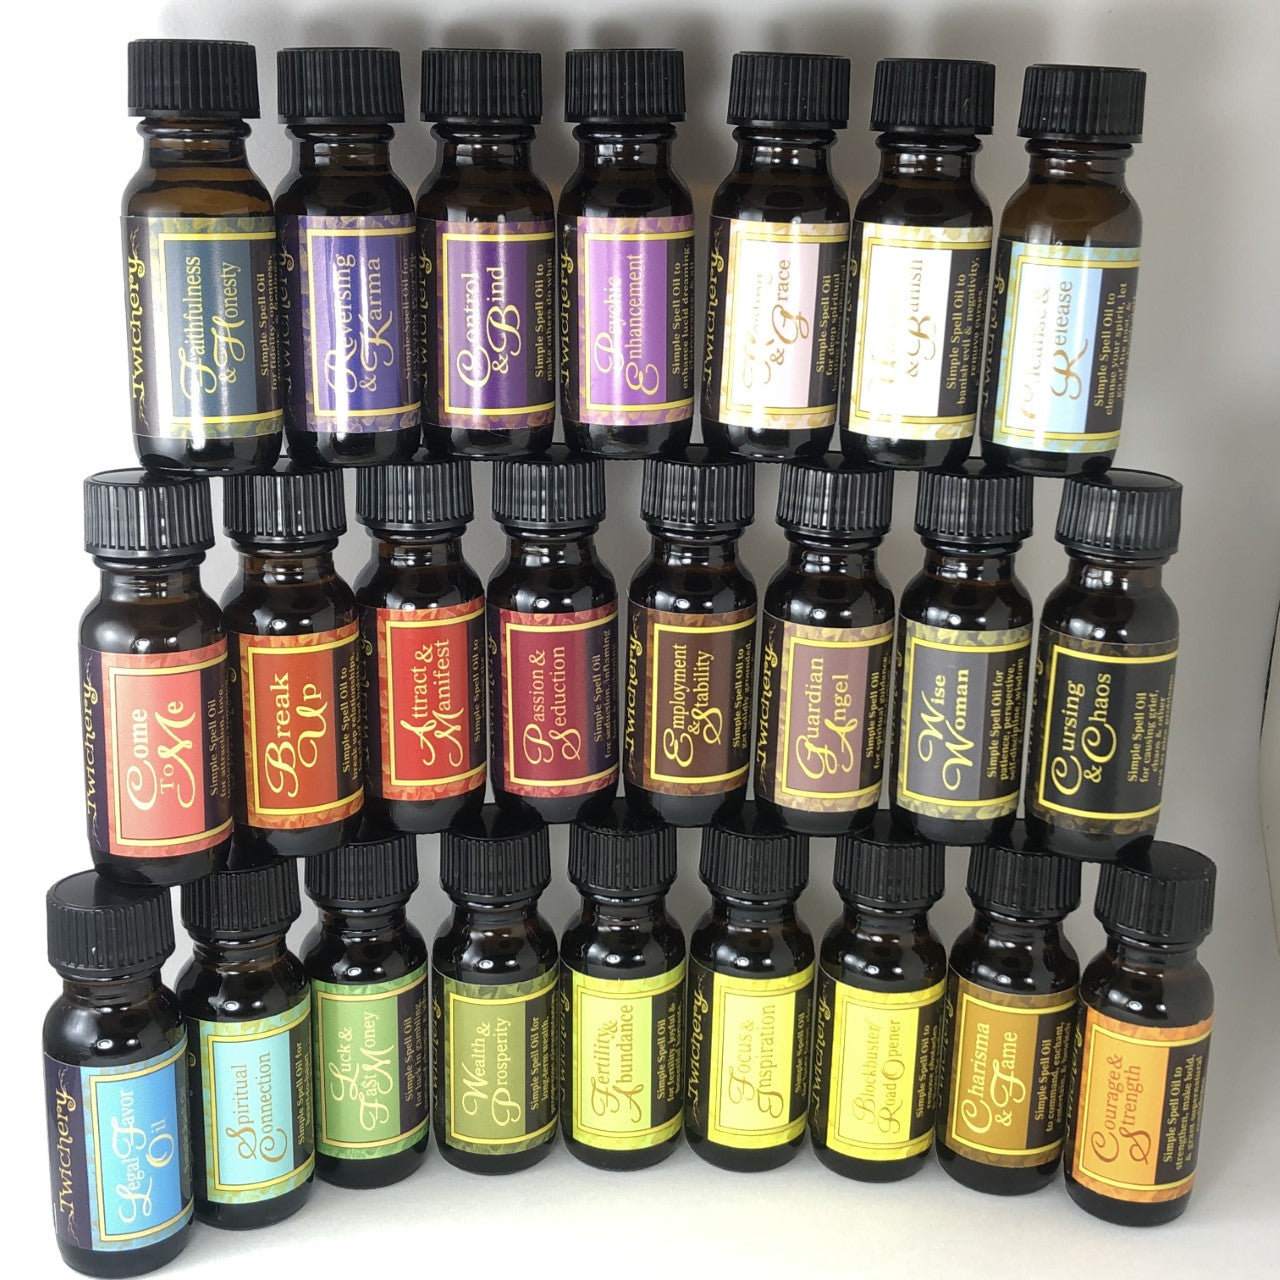 Pictured: All of Twichery's Quikspell Oils. Collect them all! Hoodoo, voodoo, Wicca, Pagan, Witchcraft Made Simple